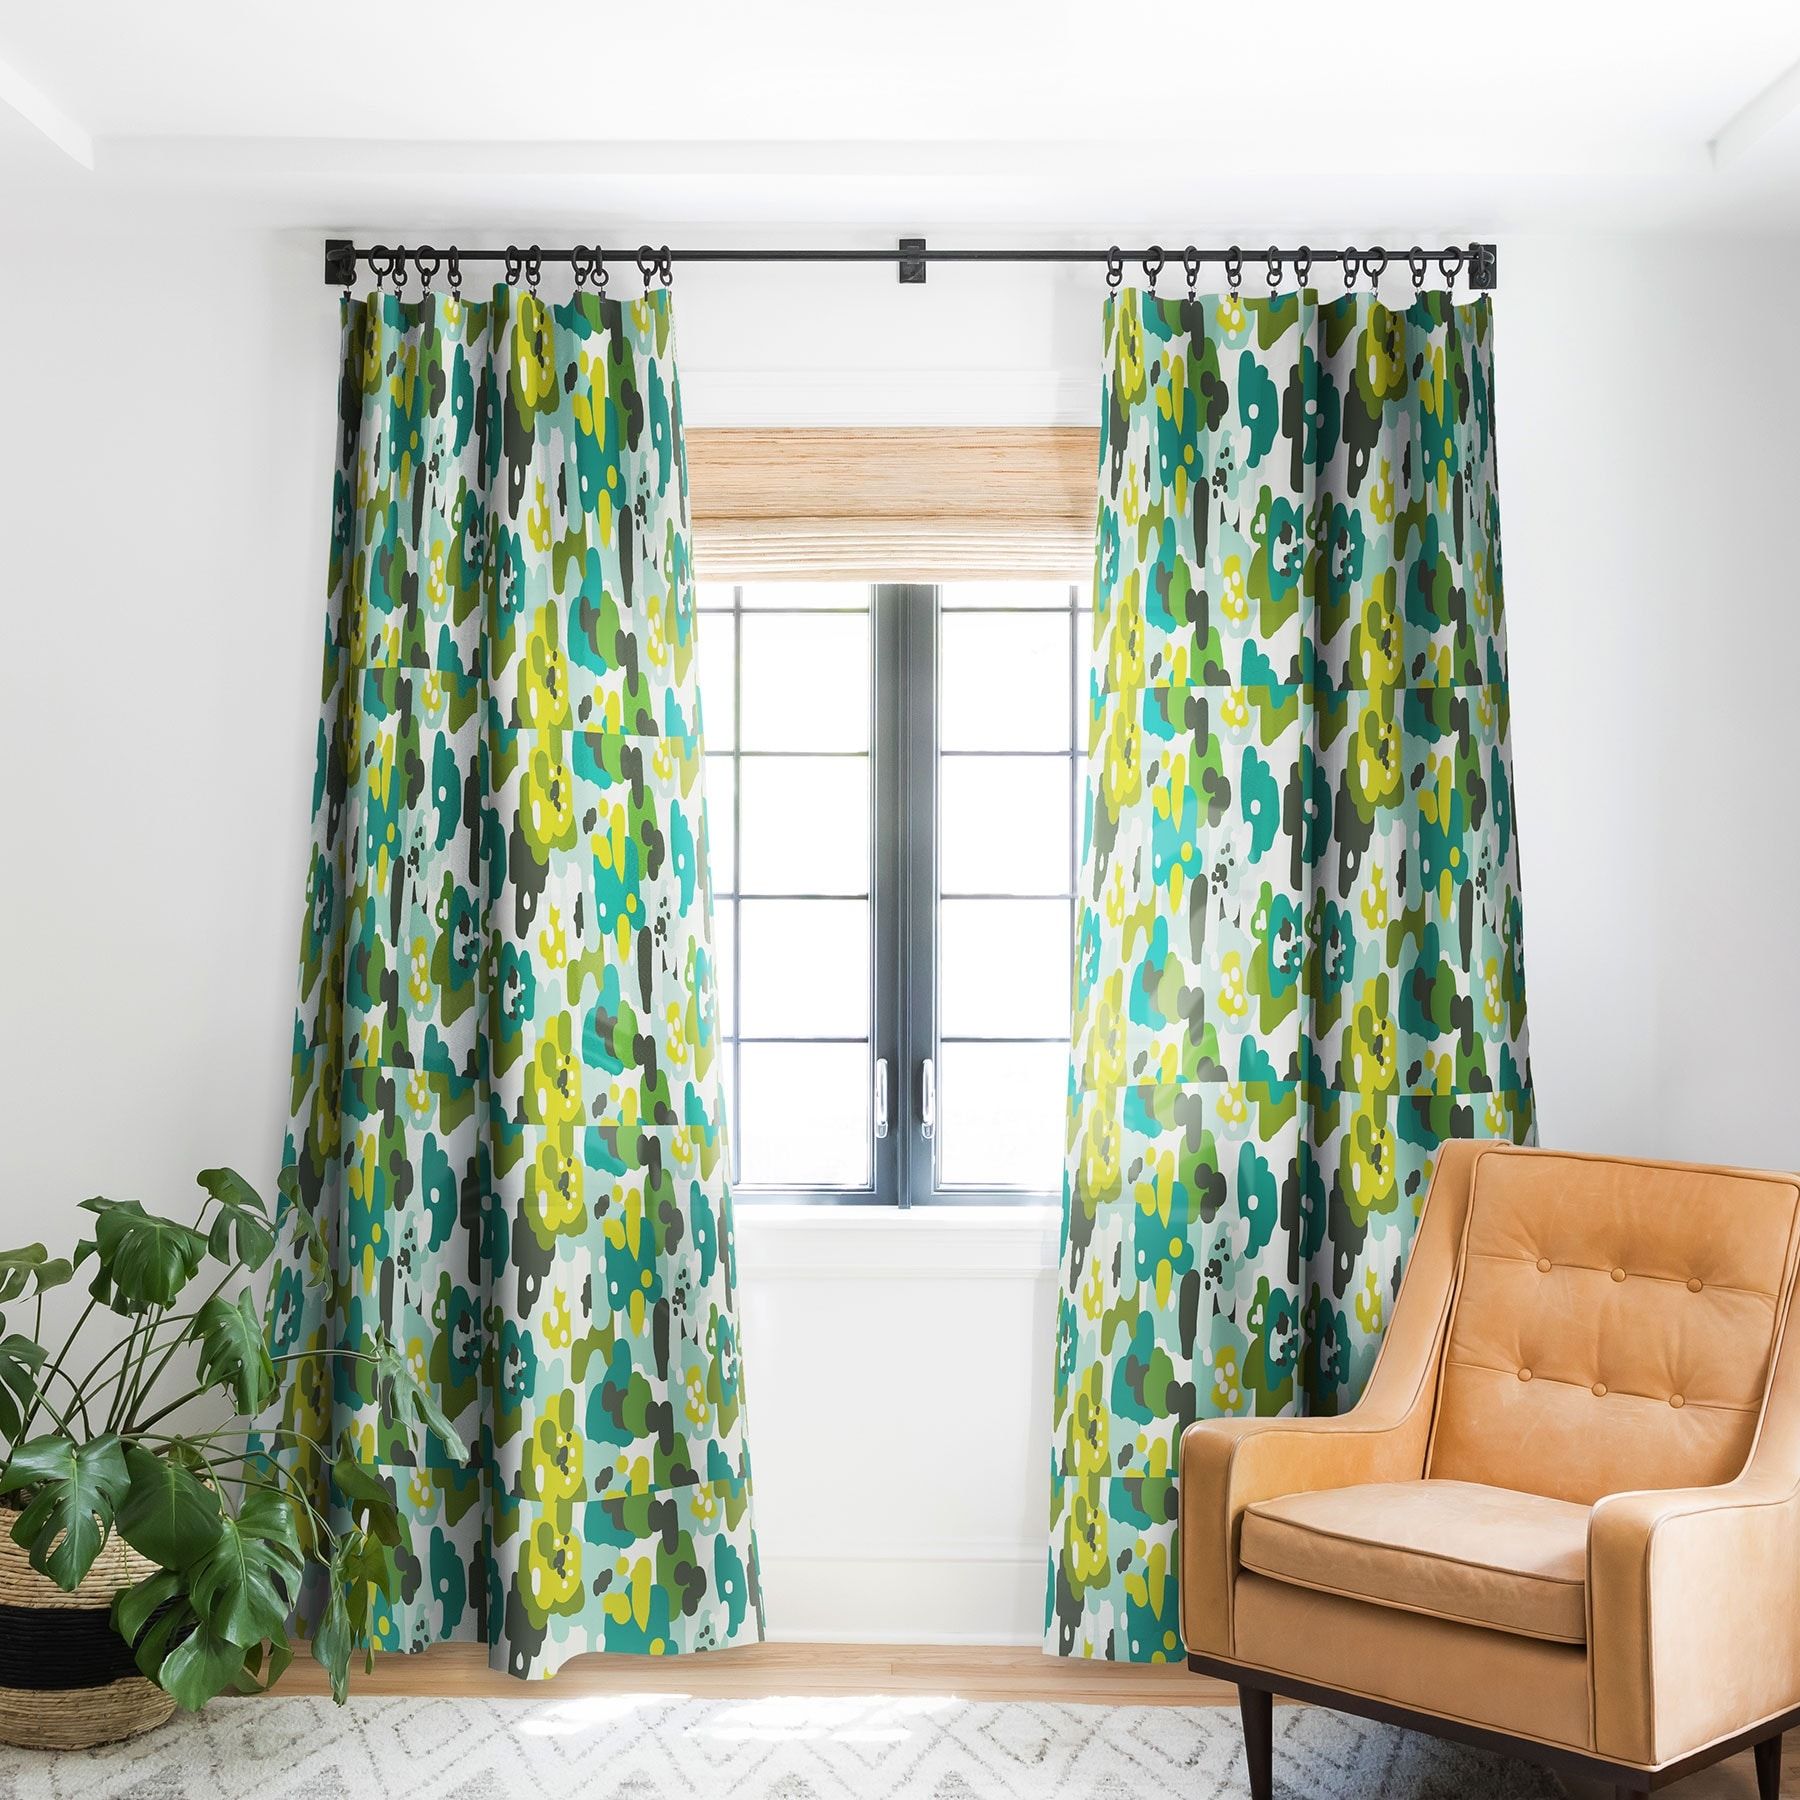 Blend In Style: The Ultimate Guide to Camo Blackout Curtains